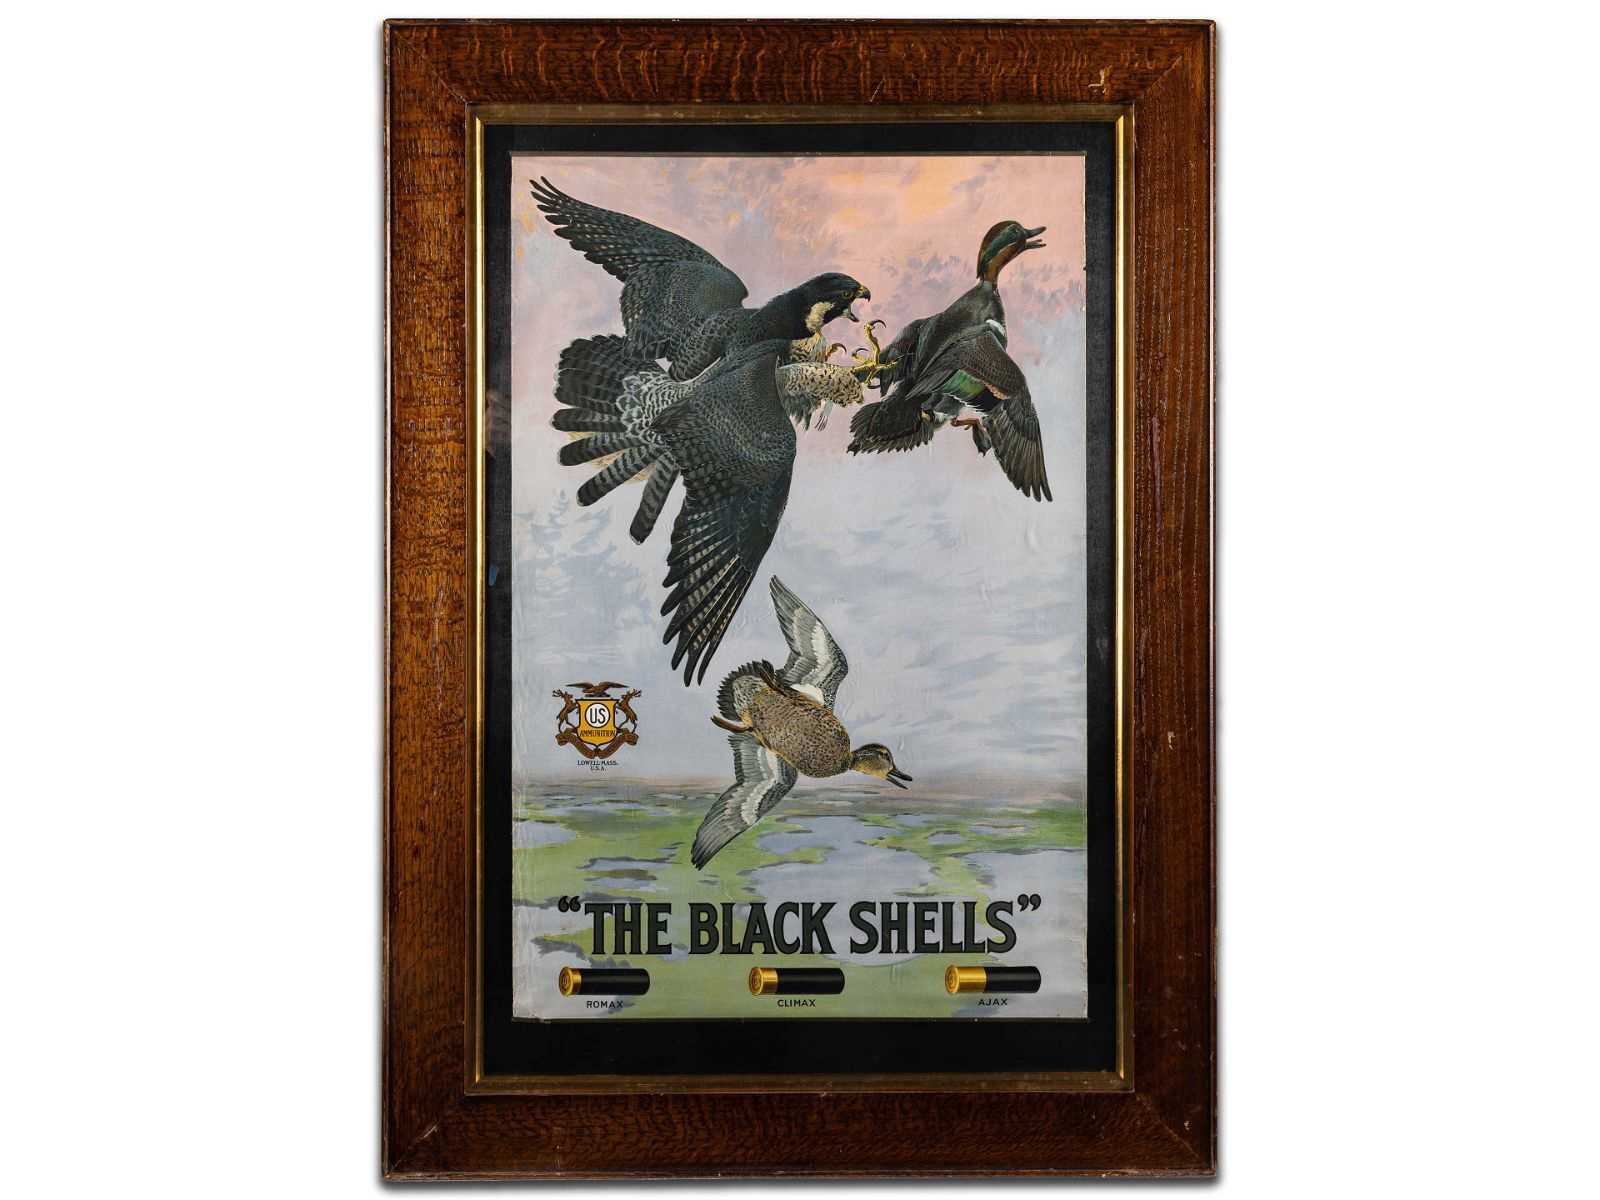 ‘The Black Shells’, a US Cartridge Company advertising poster estimated at $50-$200,000 at Richmond Auctions.